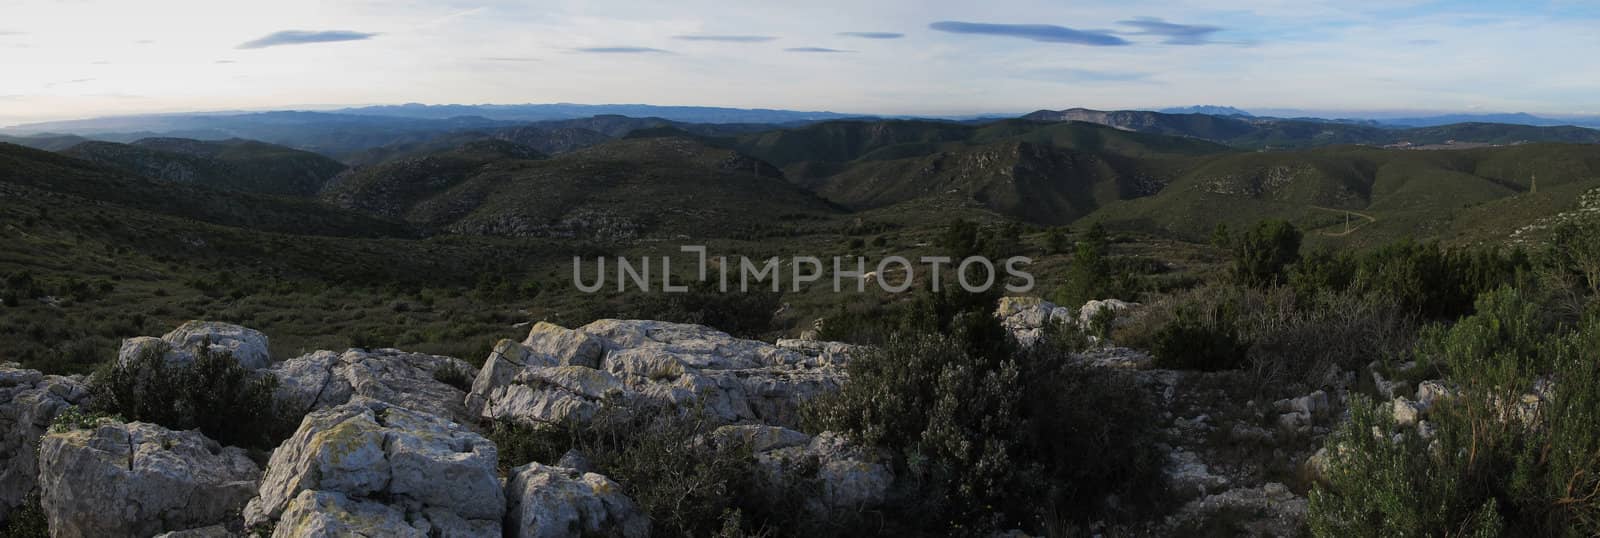 Panorama view from the natural park of Garraf towards mediterranean hills and mountains